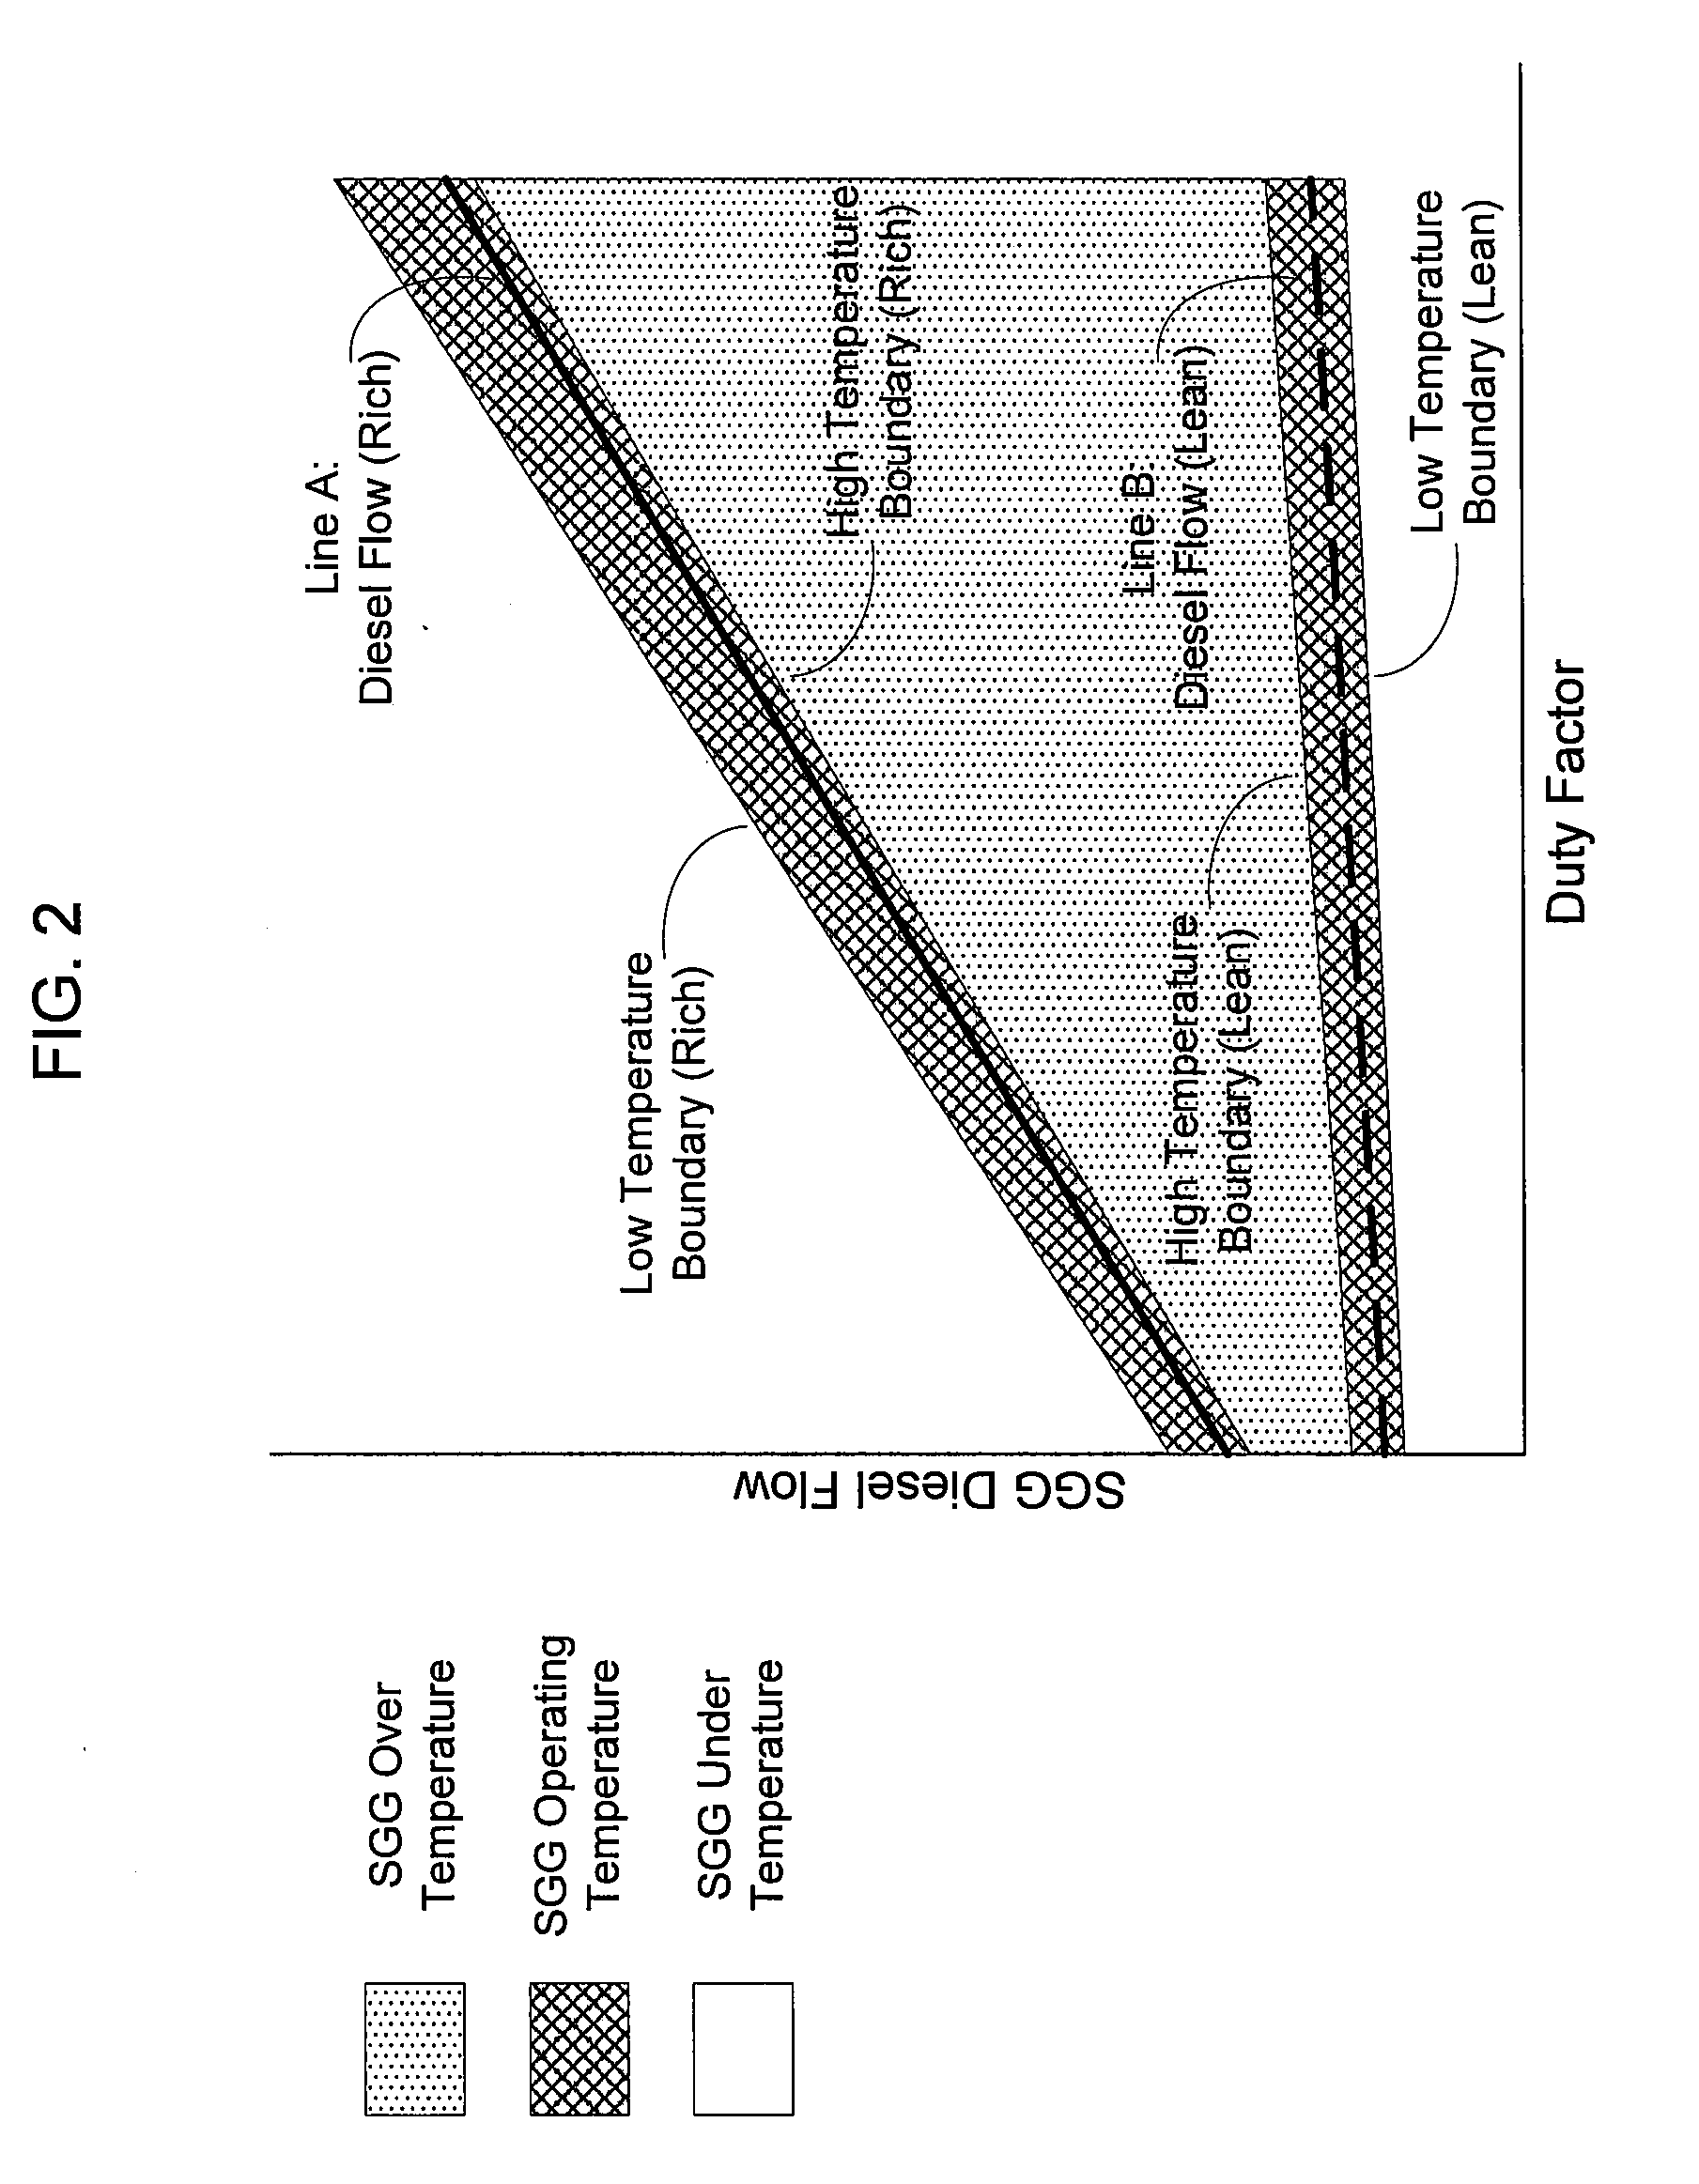 Method of operating a syngas generator